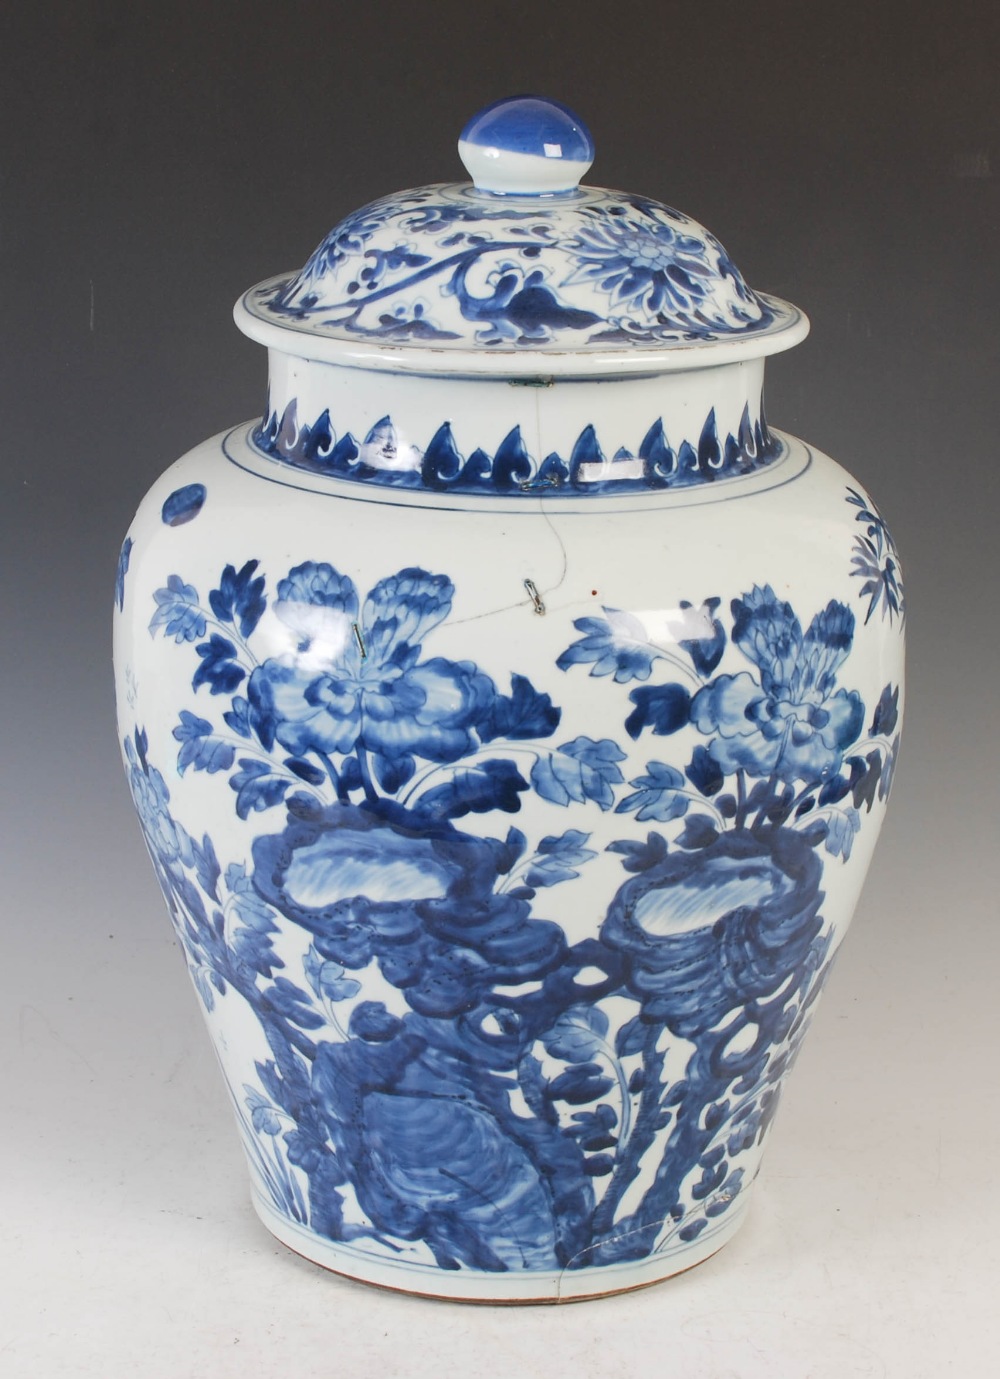 A Chinese porcelain blue and white jar and cover, probably late Ming Dynasty, decorated with